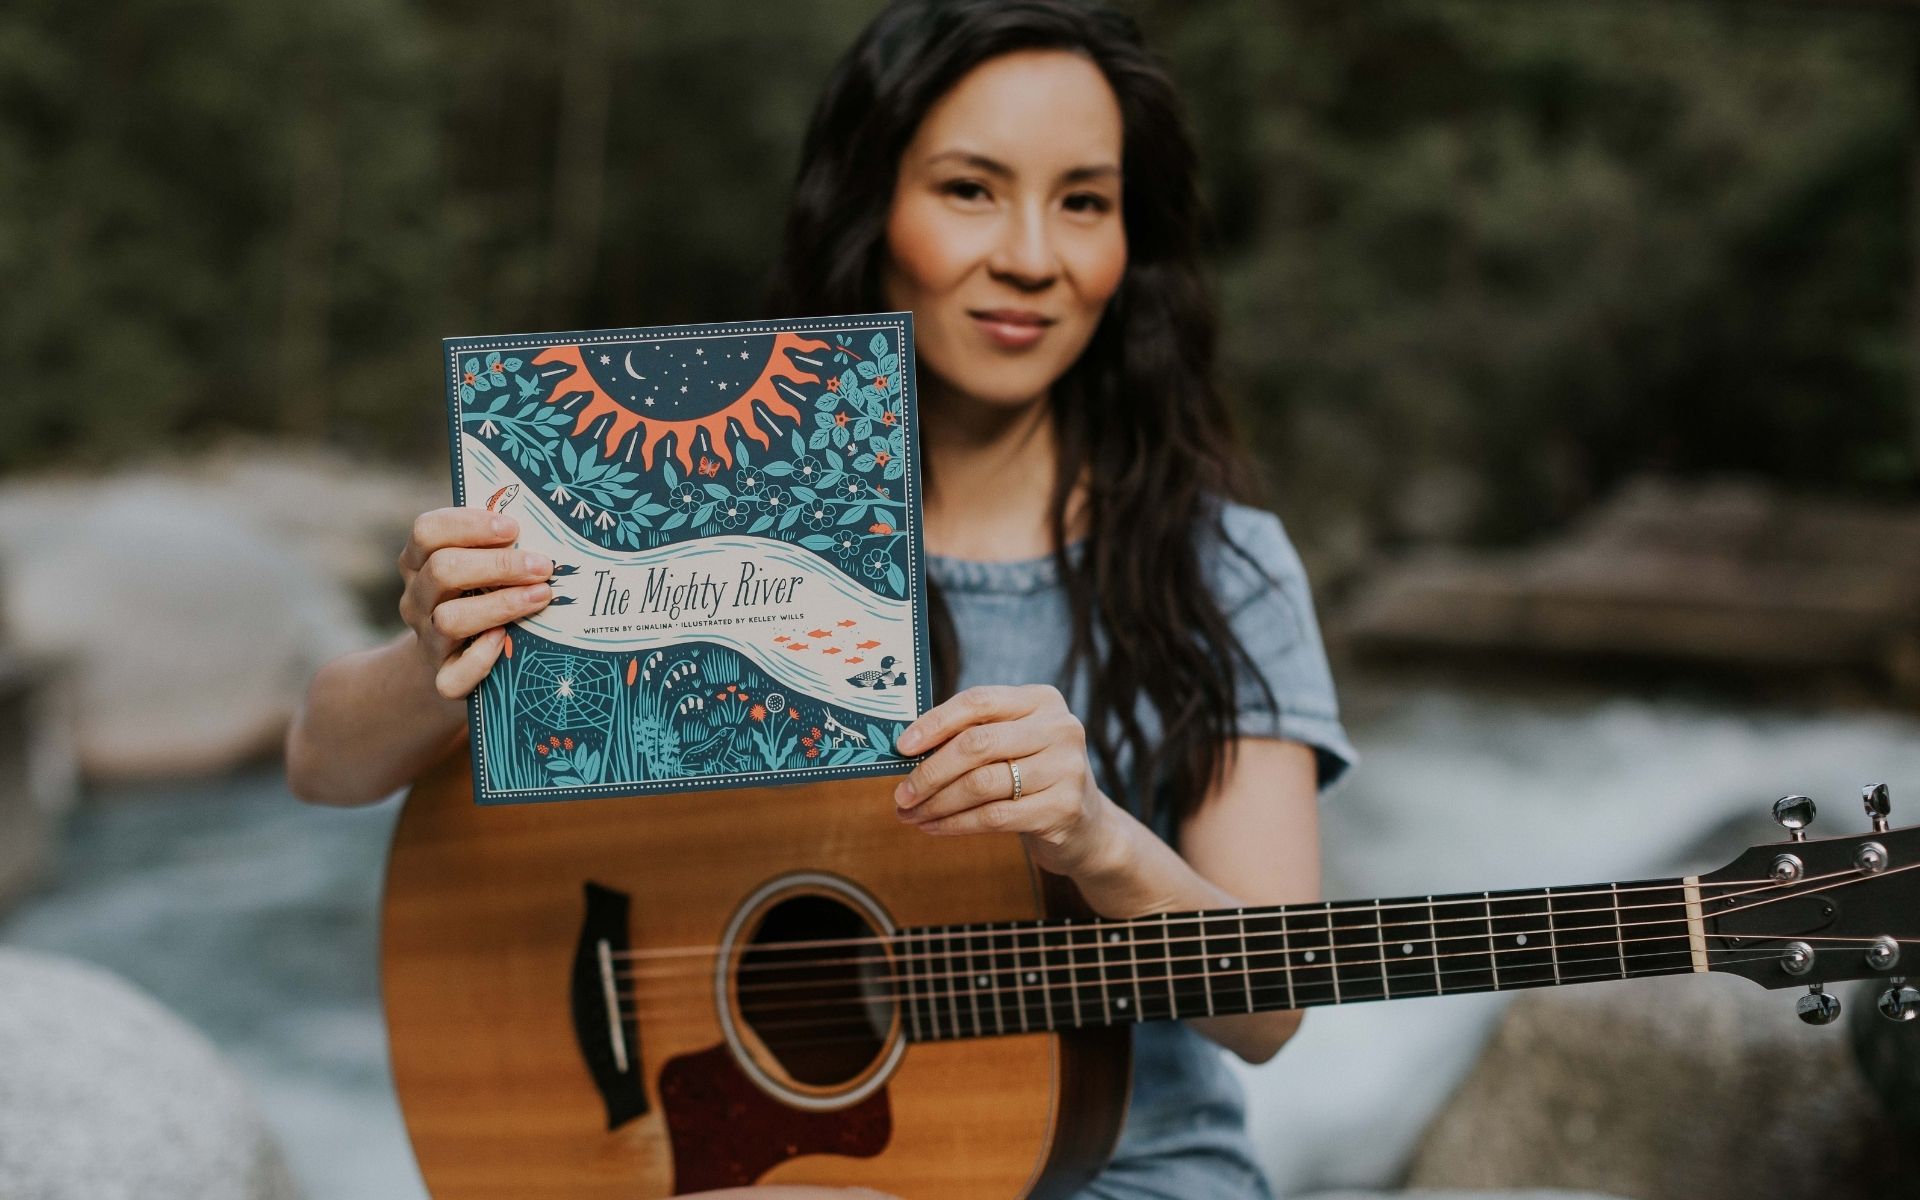 Ginalina sitting beside a river with her guitar, holding up her book The Mighty River. Join us for Ginalina’s workshop, The Wild & Wonderful West Coast workshop on June 5th